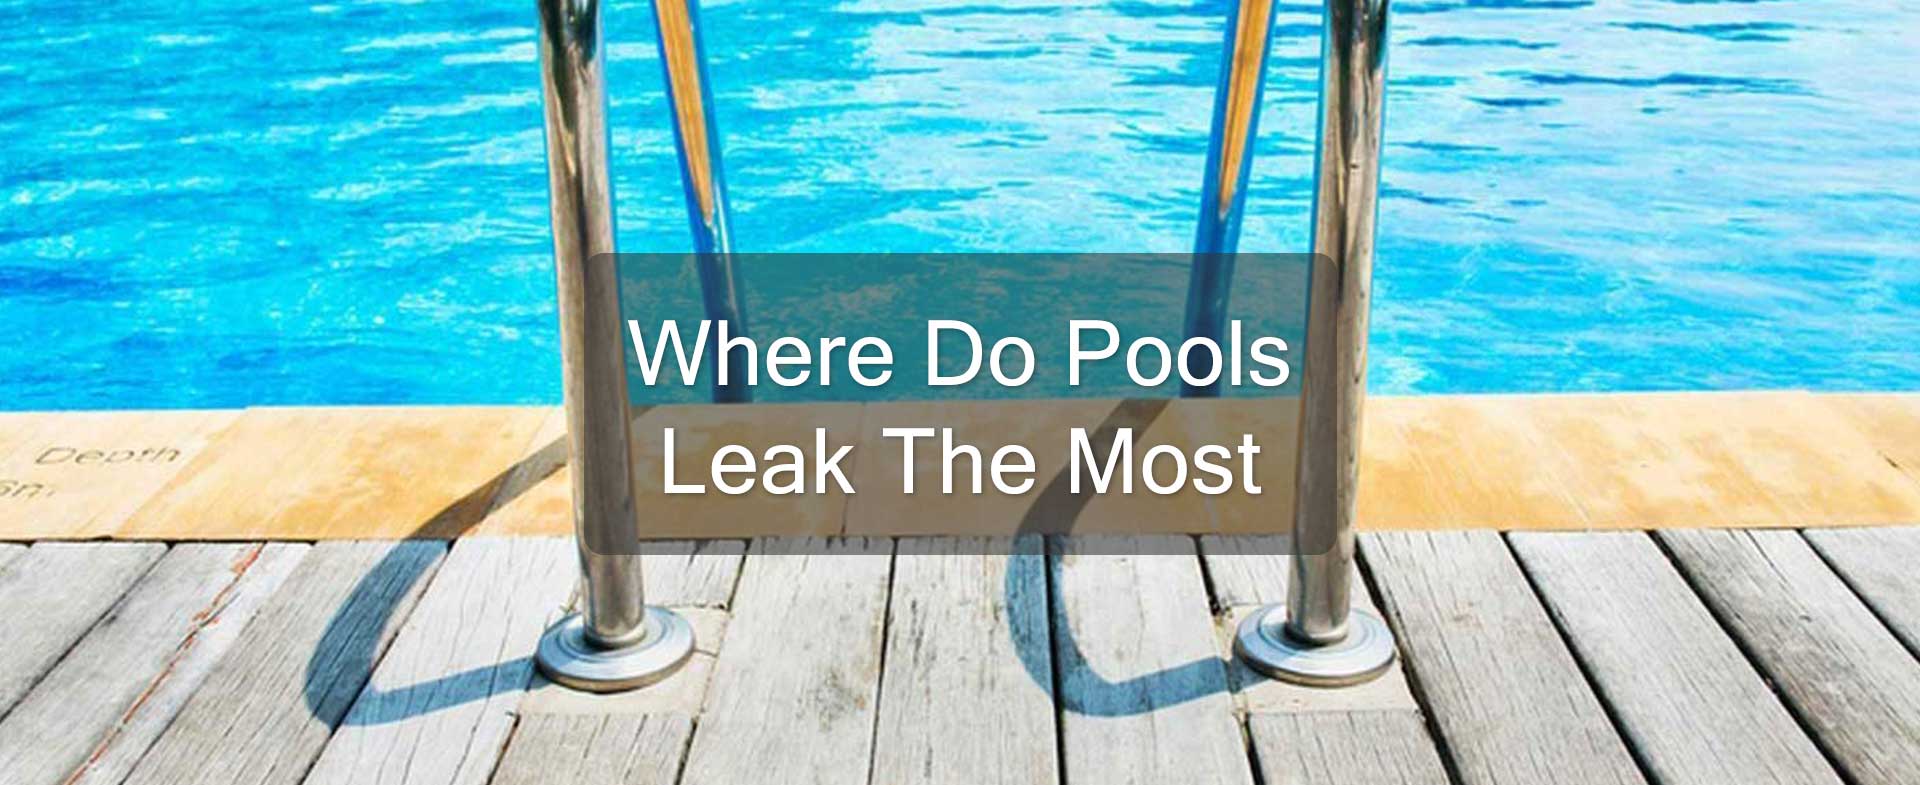 Where Do Pools Leak The Most?